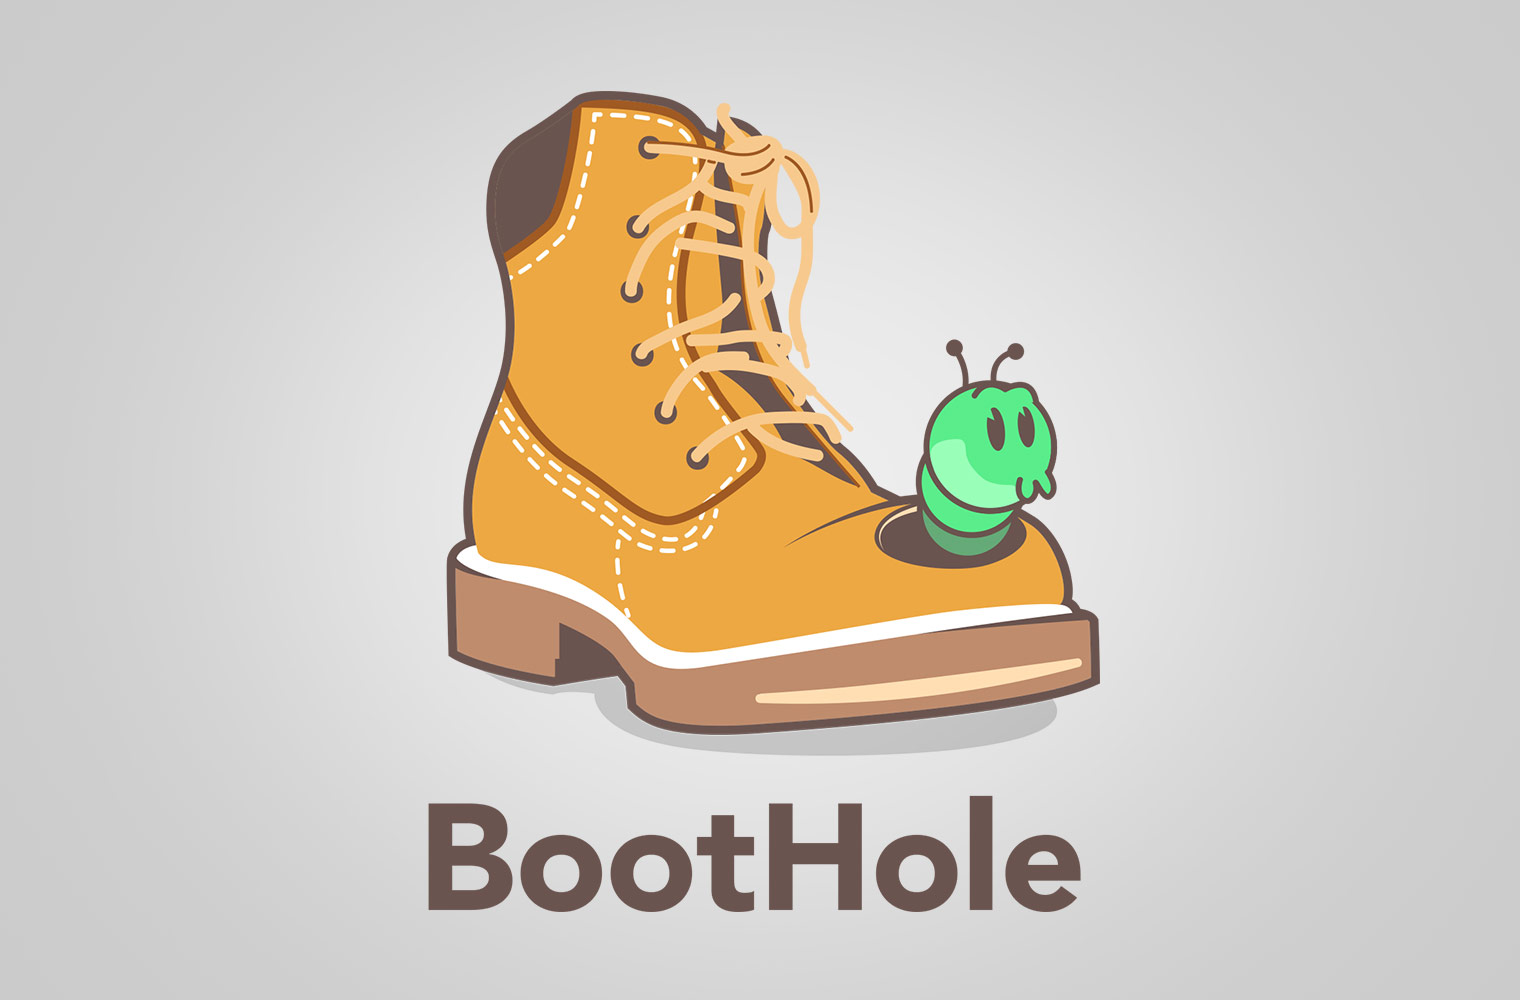 Grub in a hole in a boot